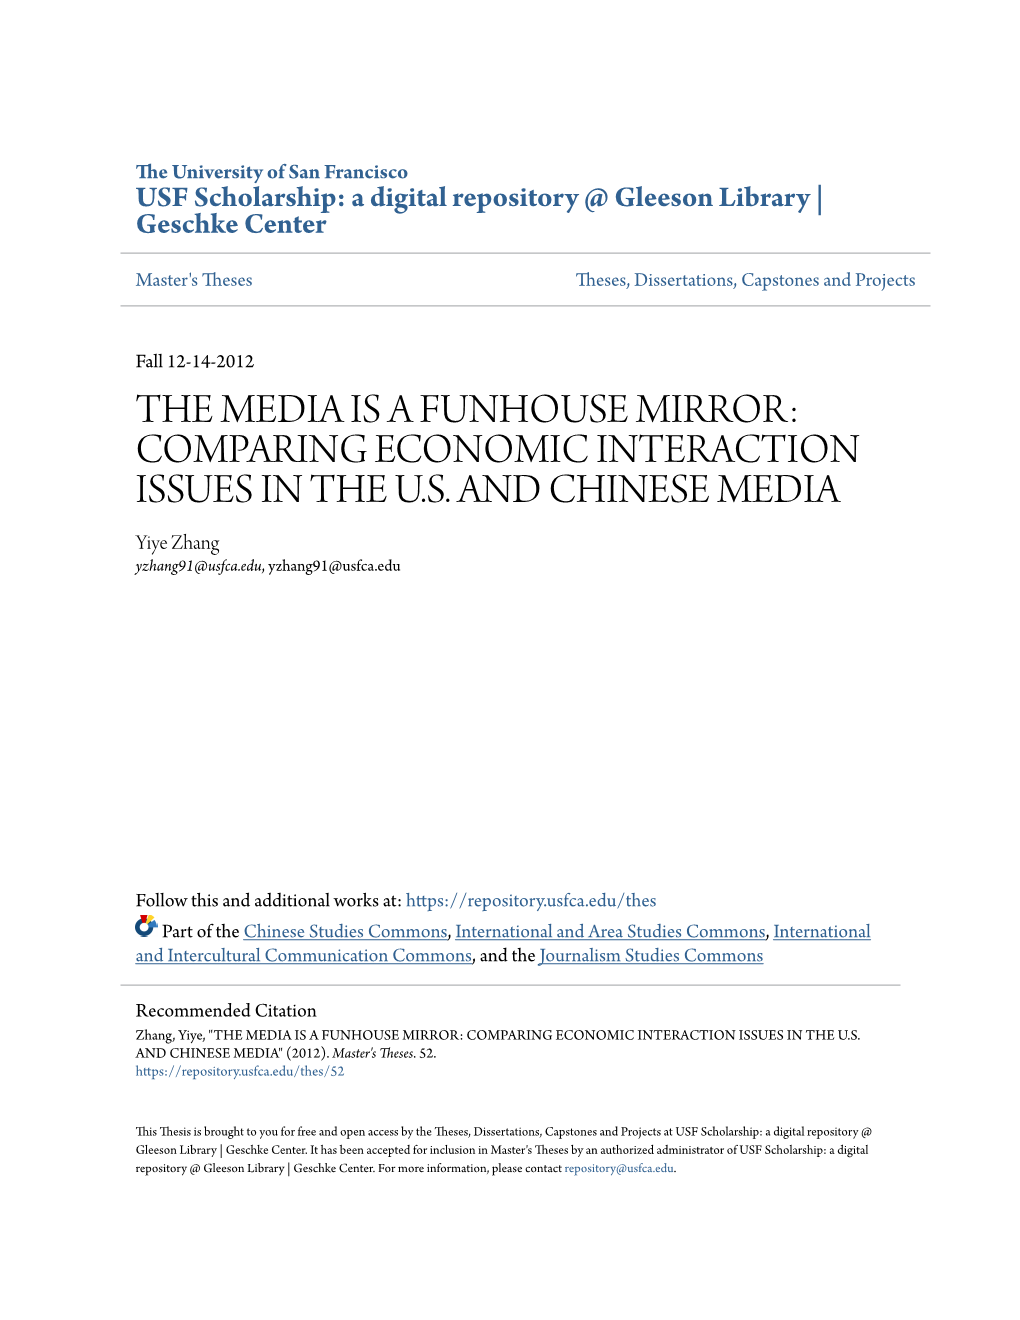 The Media Is a Funhouse Mirror: Comparing Economic Interaction Issues in the U.S